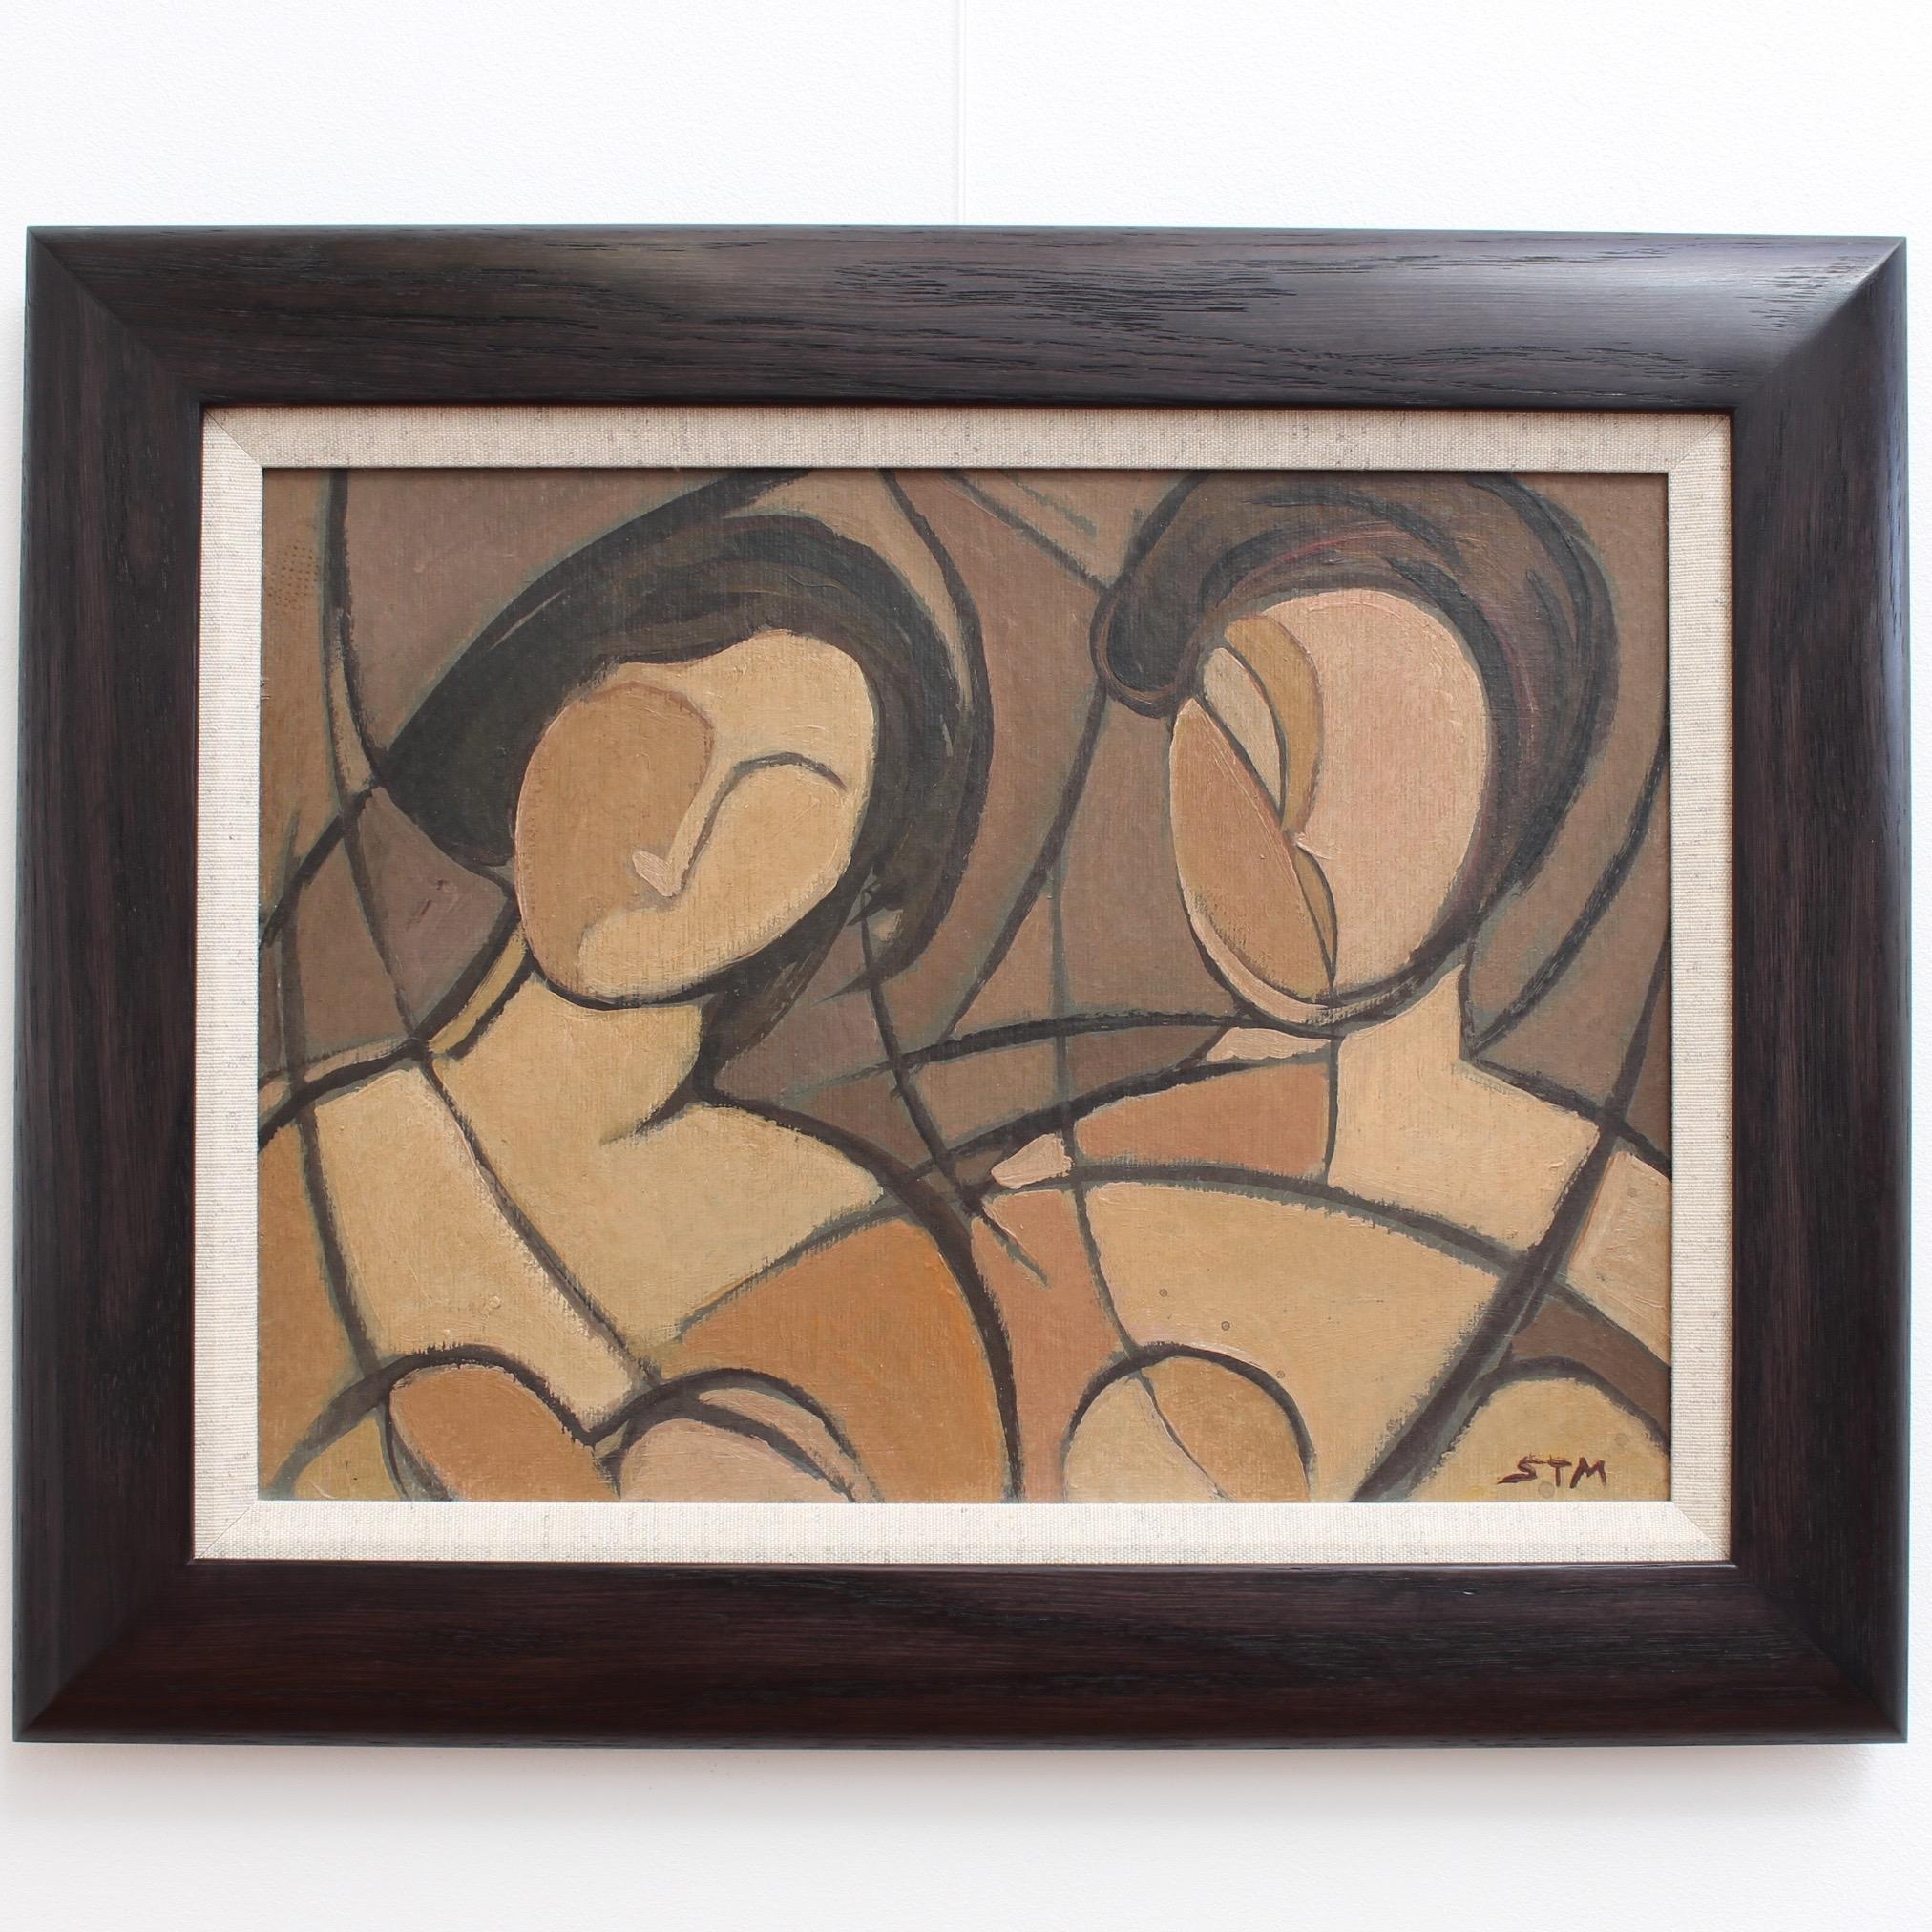 'Lost in the Shadows' by STM, Mid-Century Modern Cubist Oil Portrait, Berlin 1